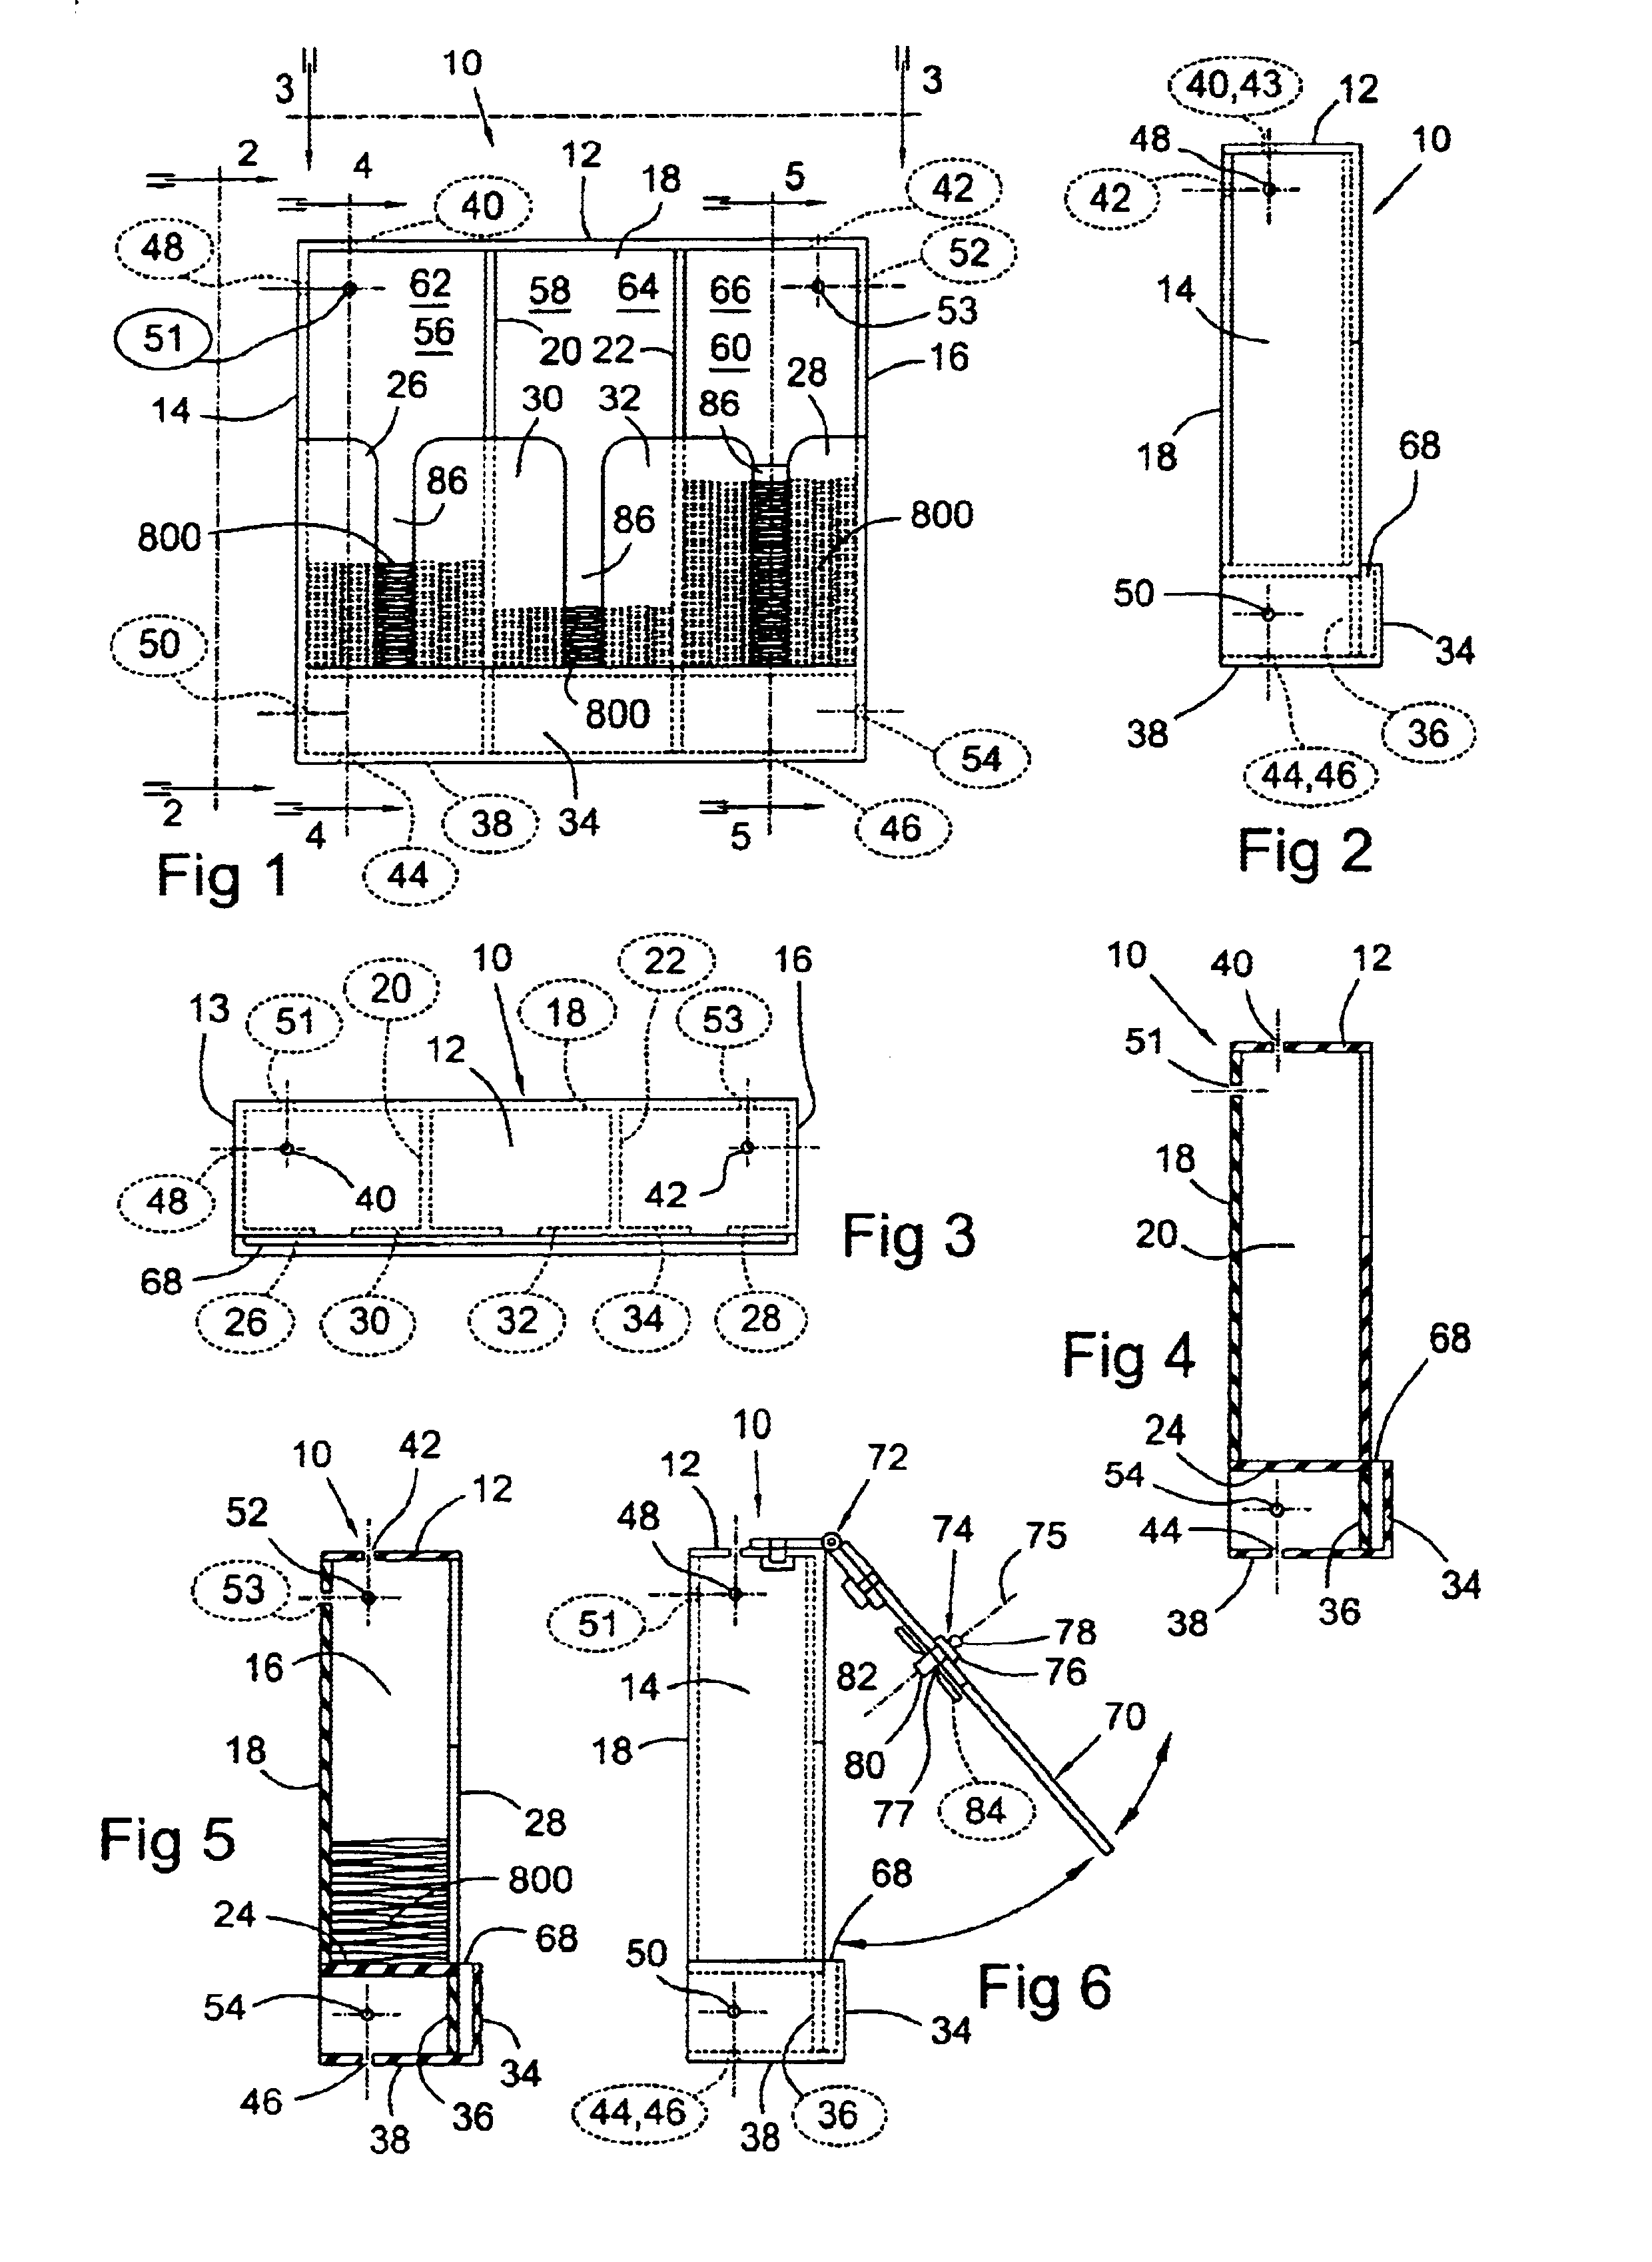 Storage and display units for cards and the like and methods of making same